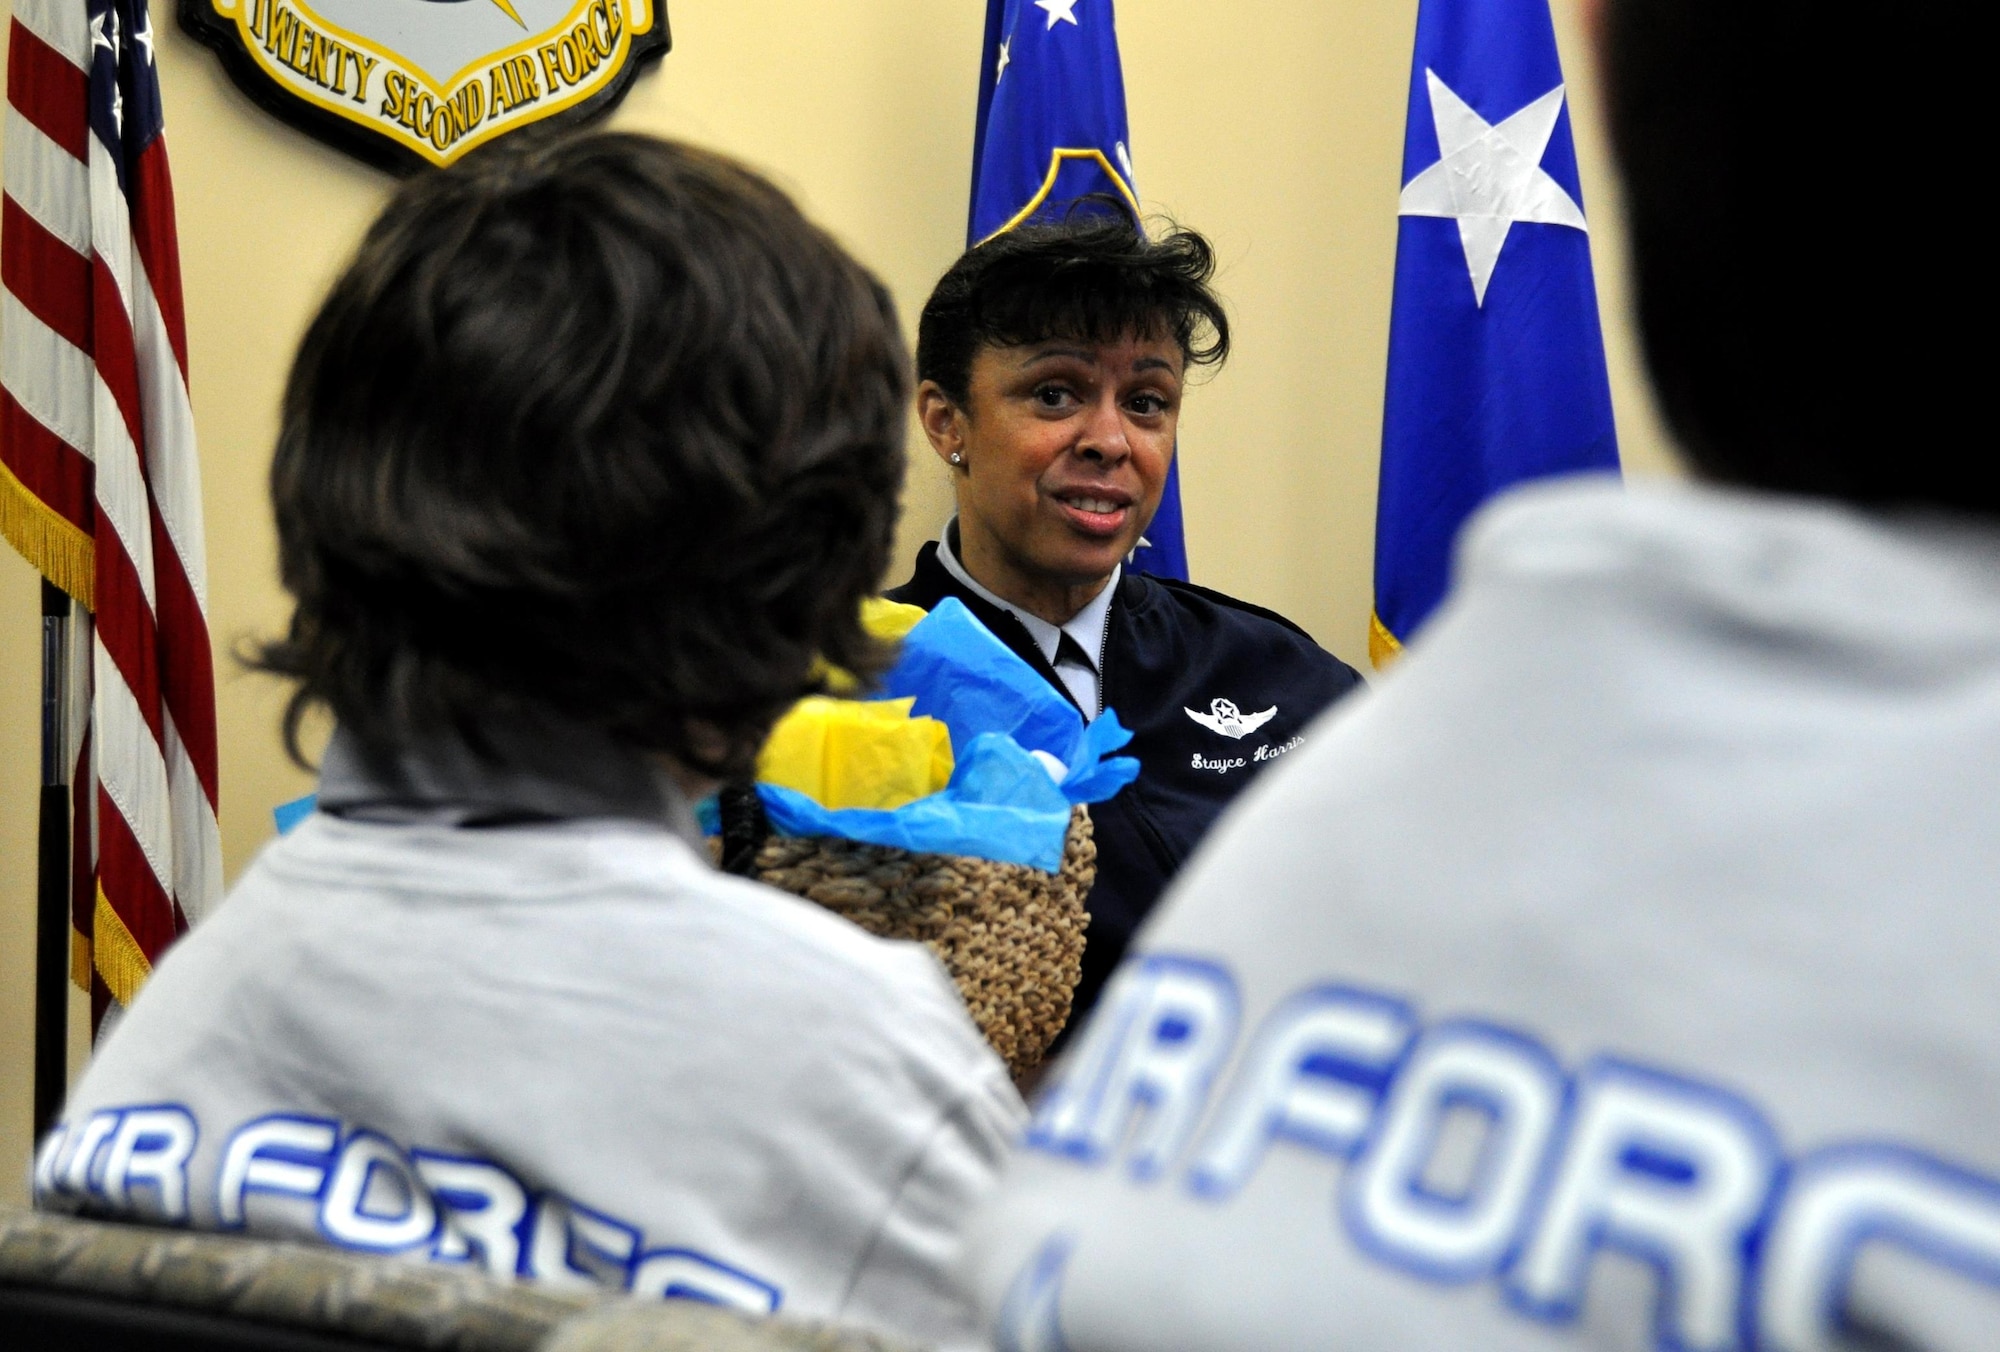 Maj. Gen. Stayce Harris, 22nd Air Force commander, answers a question for students from Bright Star Elementary in Douglasville, Ga. at the 22nd AF headquarters at Dobbins Air Reserve Base, Ga., Feb. 7, 2015. Ten students from Bright Star visited the installation to interview Harris for Black History month. (U.S. Air Force photo/Senior Airman Daniel Phelps)